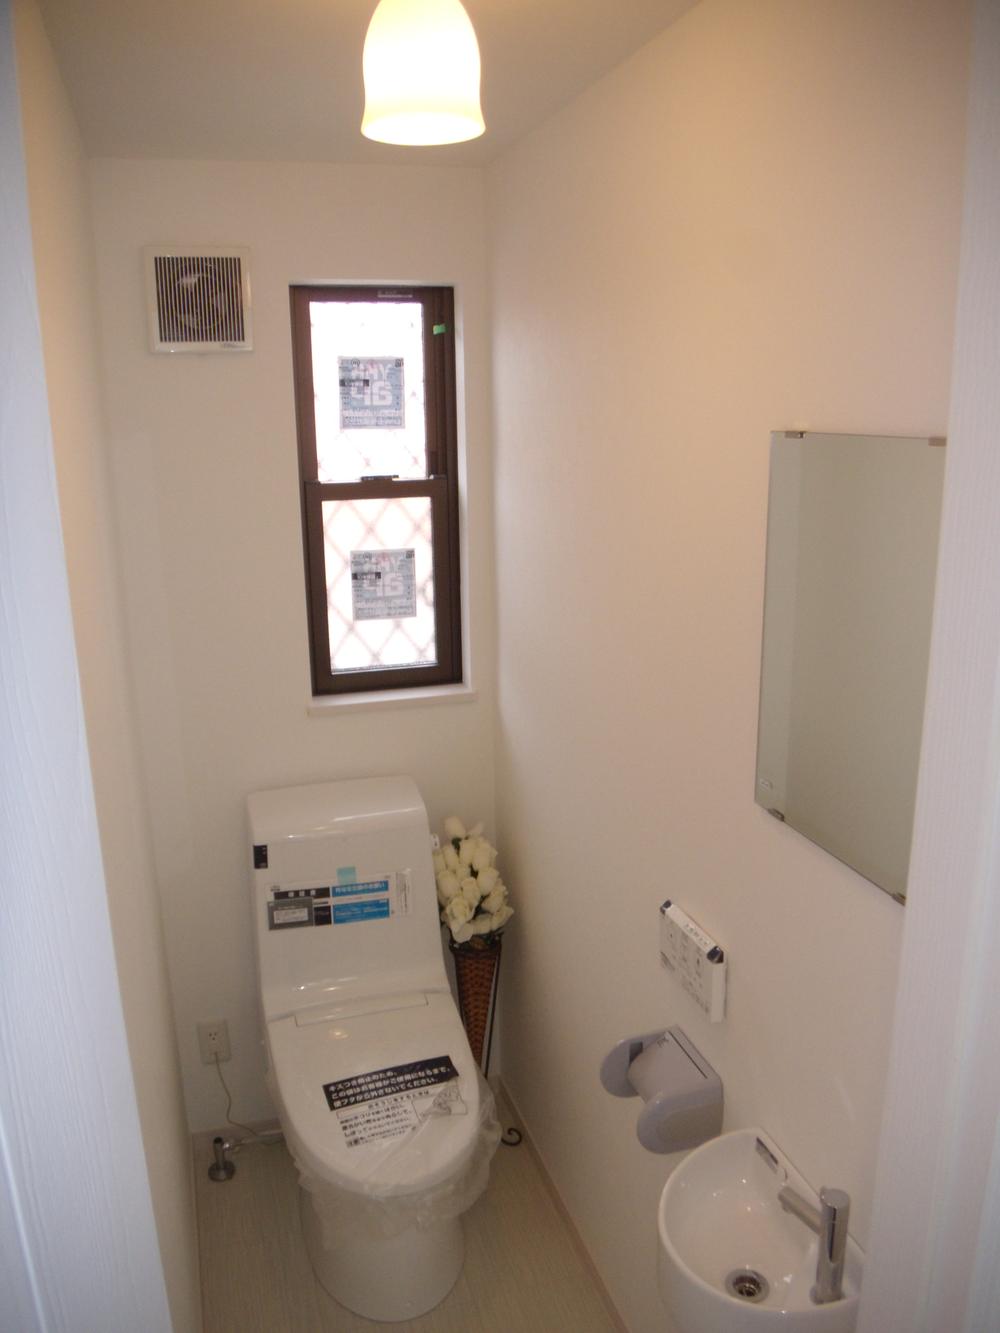 Same specifications photos (Other introspection). Toilet